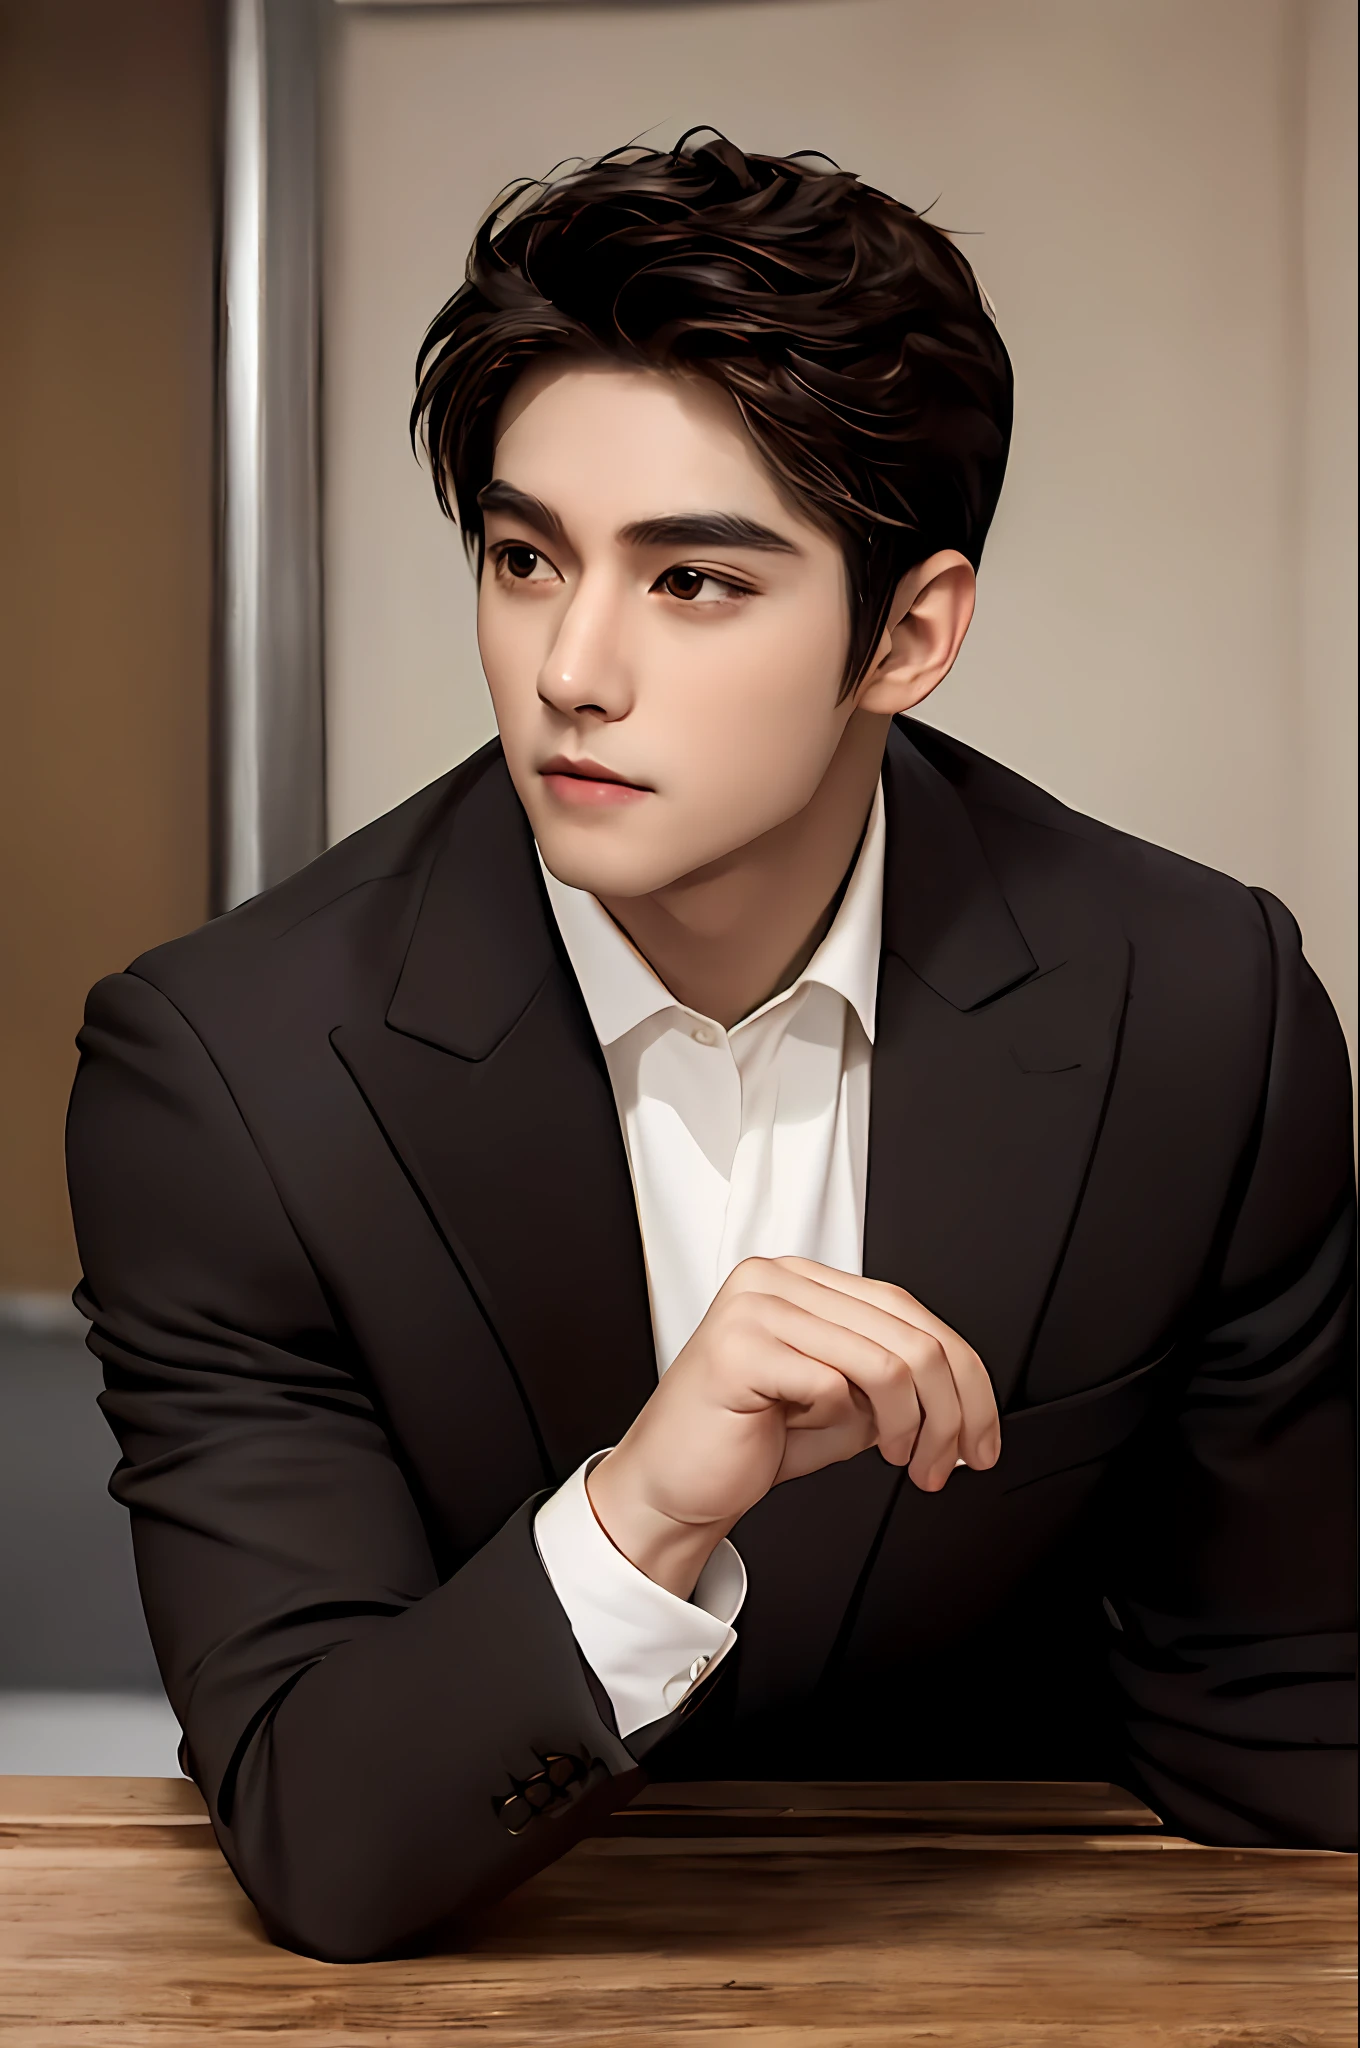 best illustration, best quality, magnificent background, male focus, brown skin, 1 boy, squat, solo, black eyes, look into the audience portrait, short black hair, sitting, asian man, 30 years old rather muscular man in suit, masterpiece, top quality, 8k UHD, digital slr, realistic painting art, thick and dignified curved eyebrows, eyes clear and large, Chiseled face, large nose, broad forehead, brown skin, dark eyes